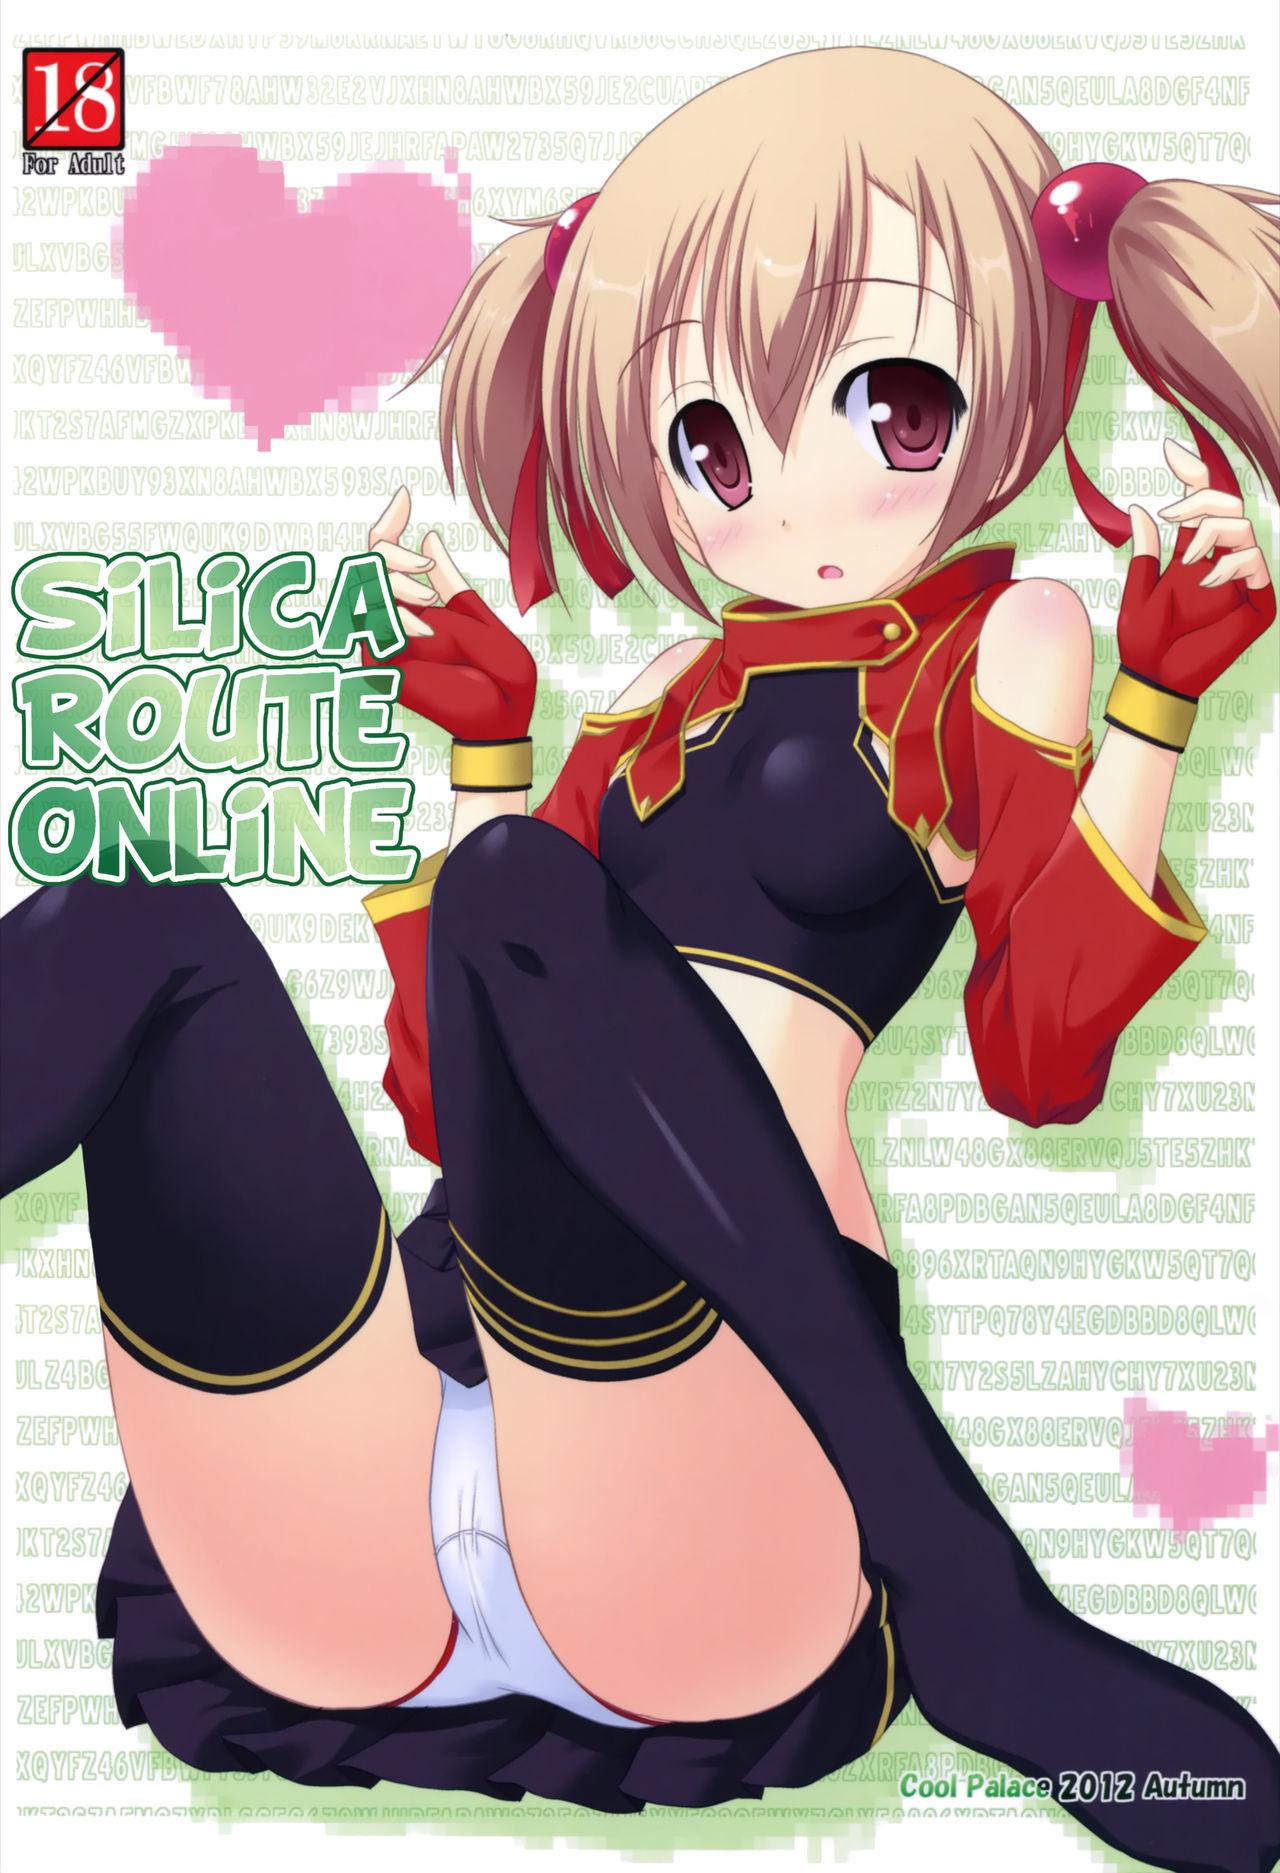 Class Room Silica Route Online - Sword art online Tittyfuck - Page 1